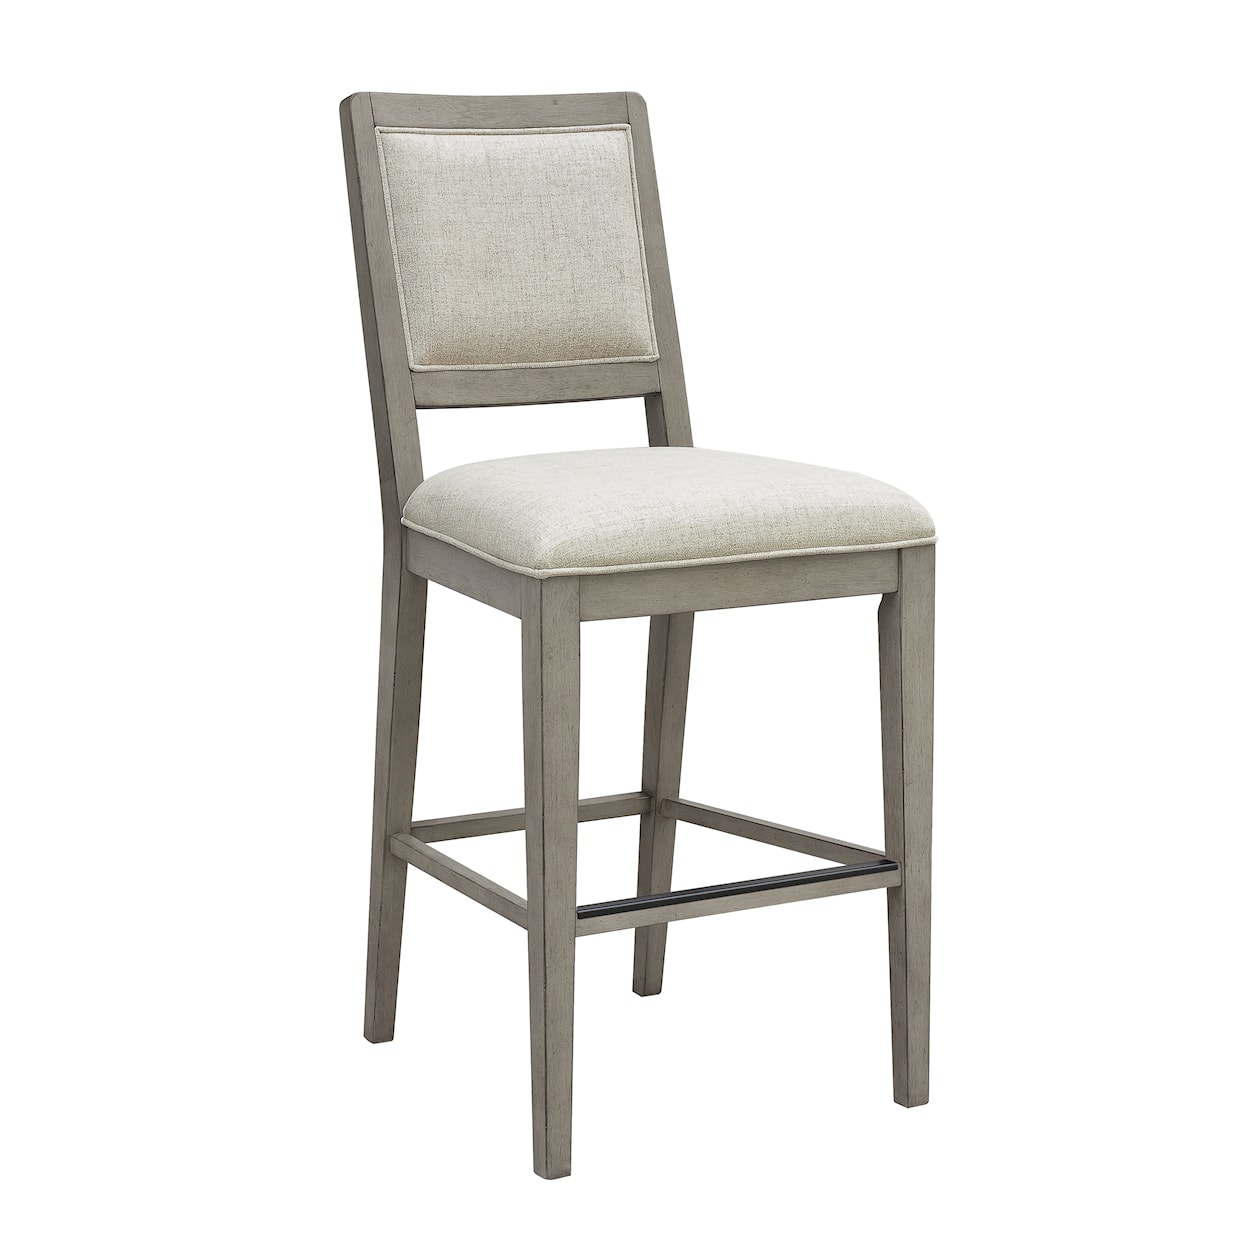 Samuel Lawrence Essex by Drew and Jonathan Home Essex Bar Side Stool